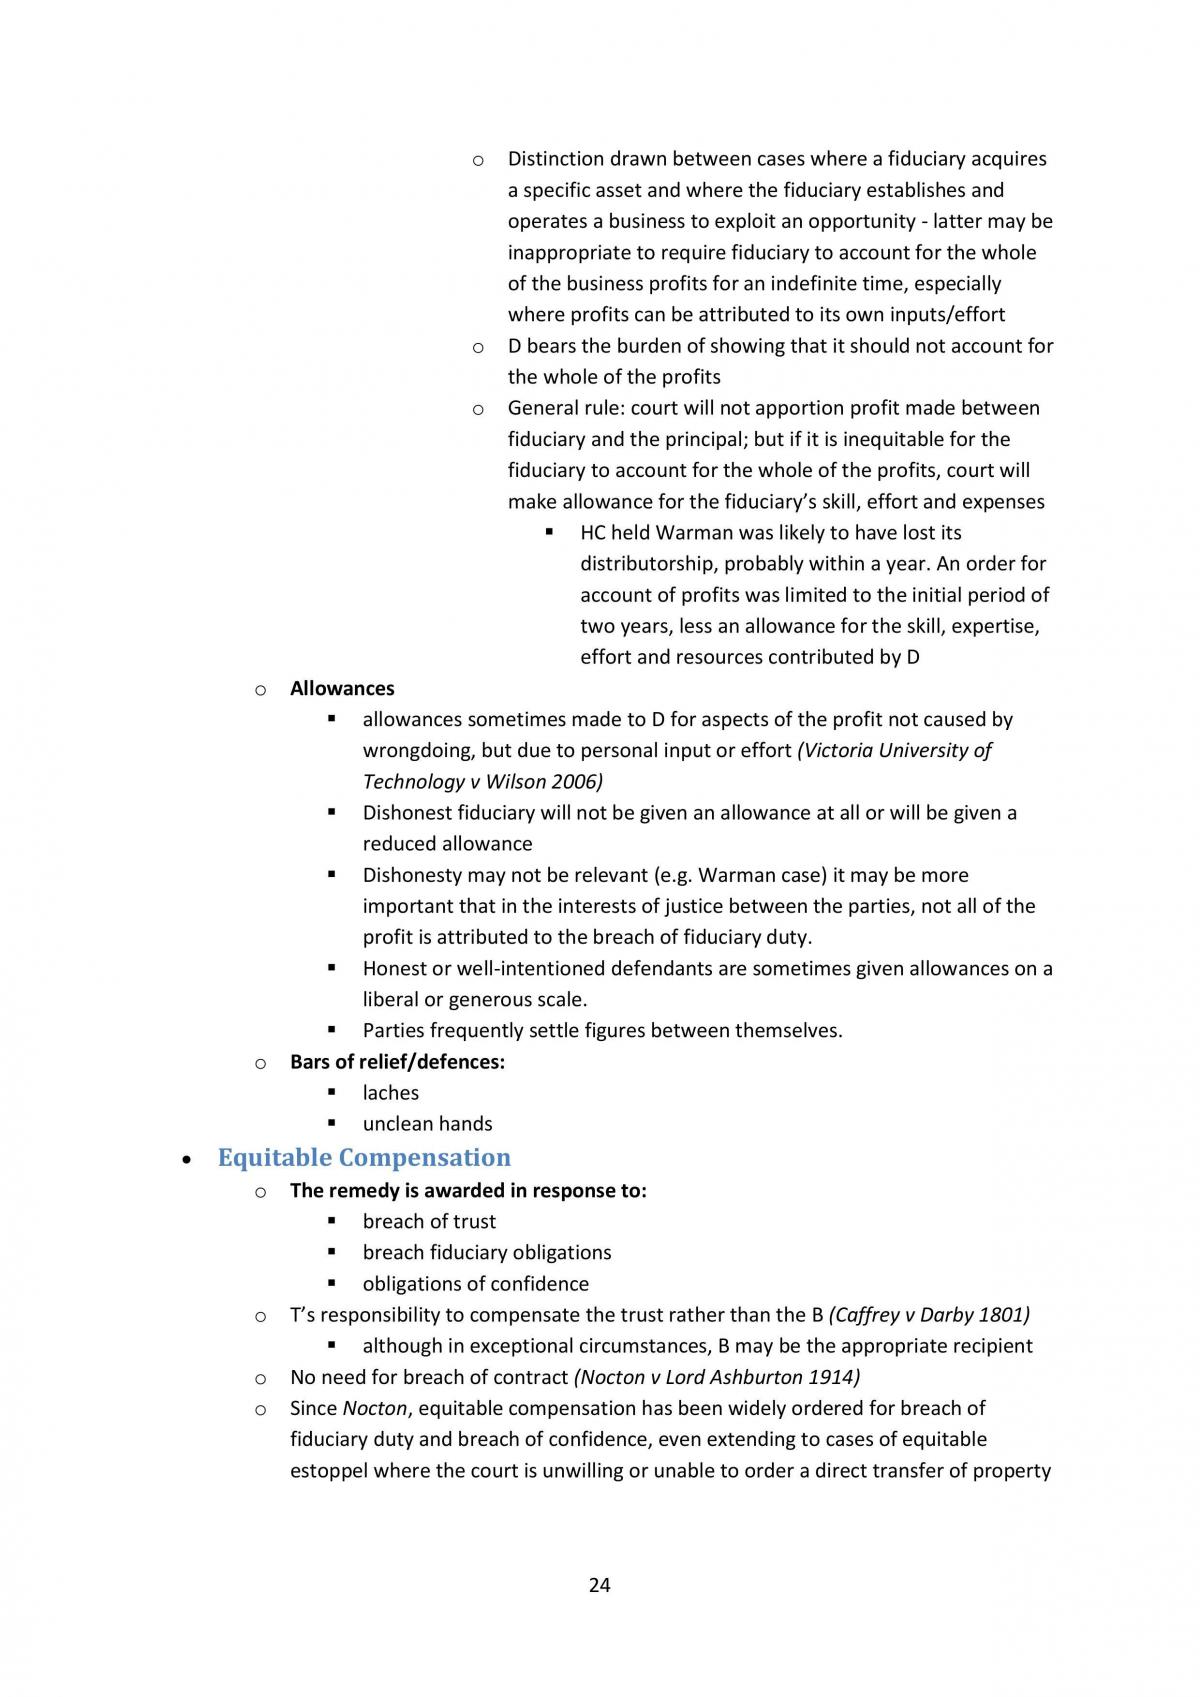 Equity and Trusts Exam Notes - Page 24